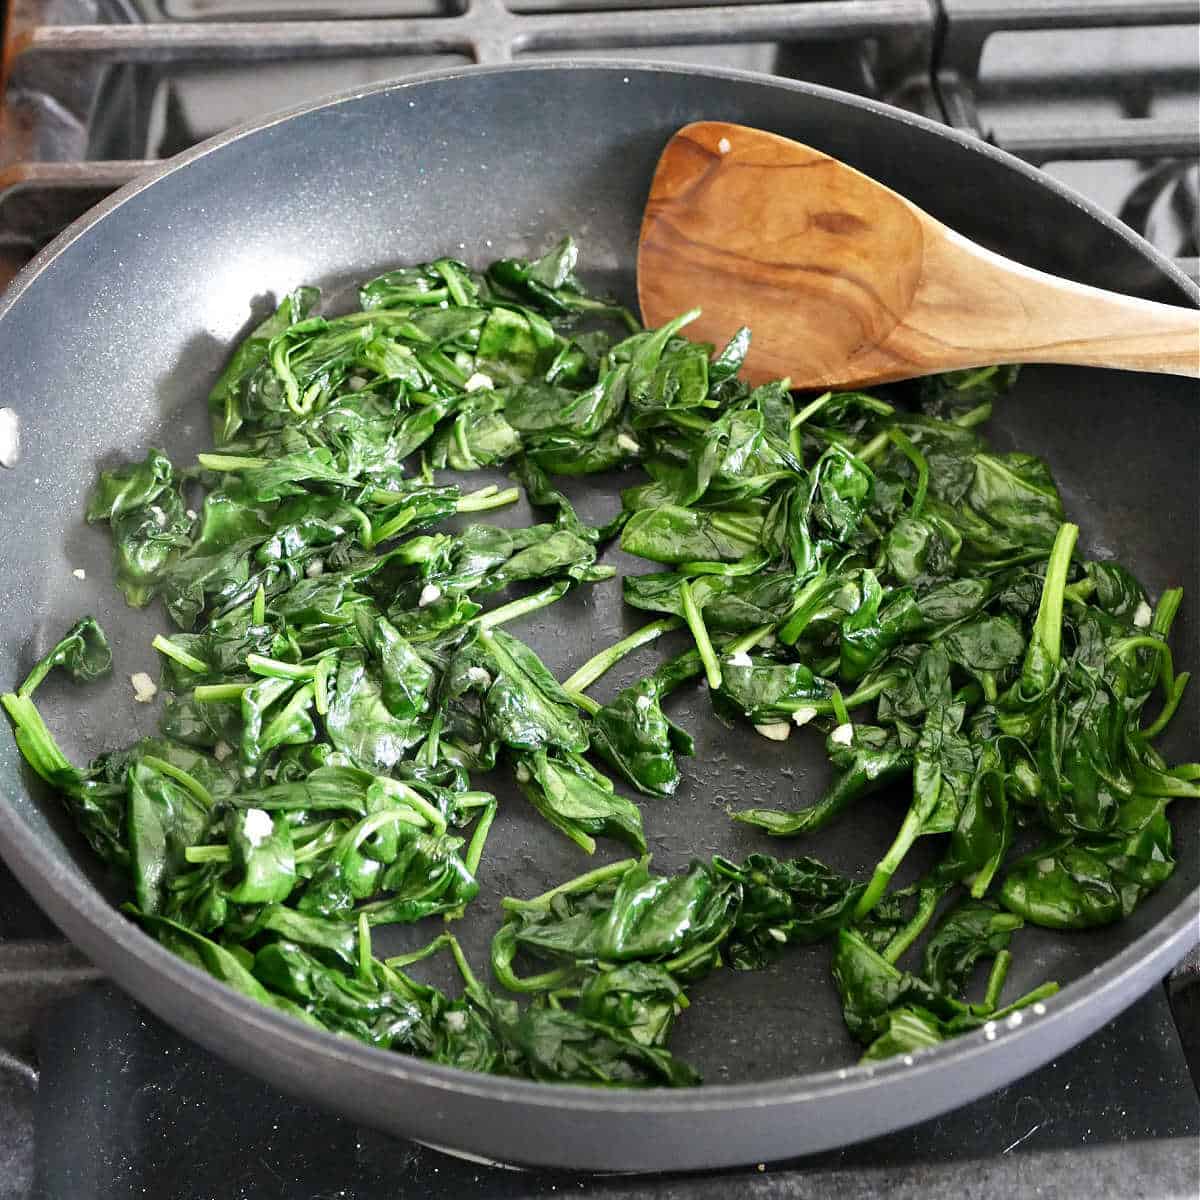 Spinach cooking in a skillet on a stove with a spoon.